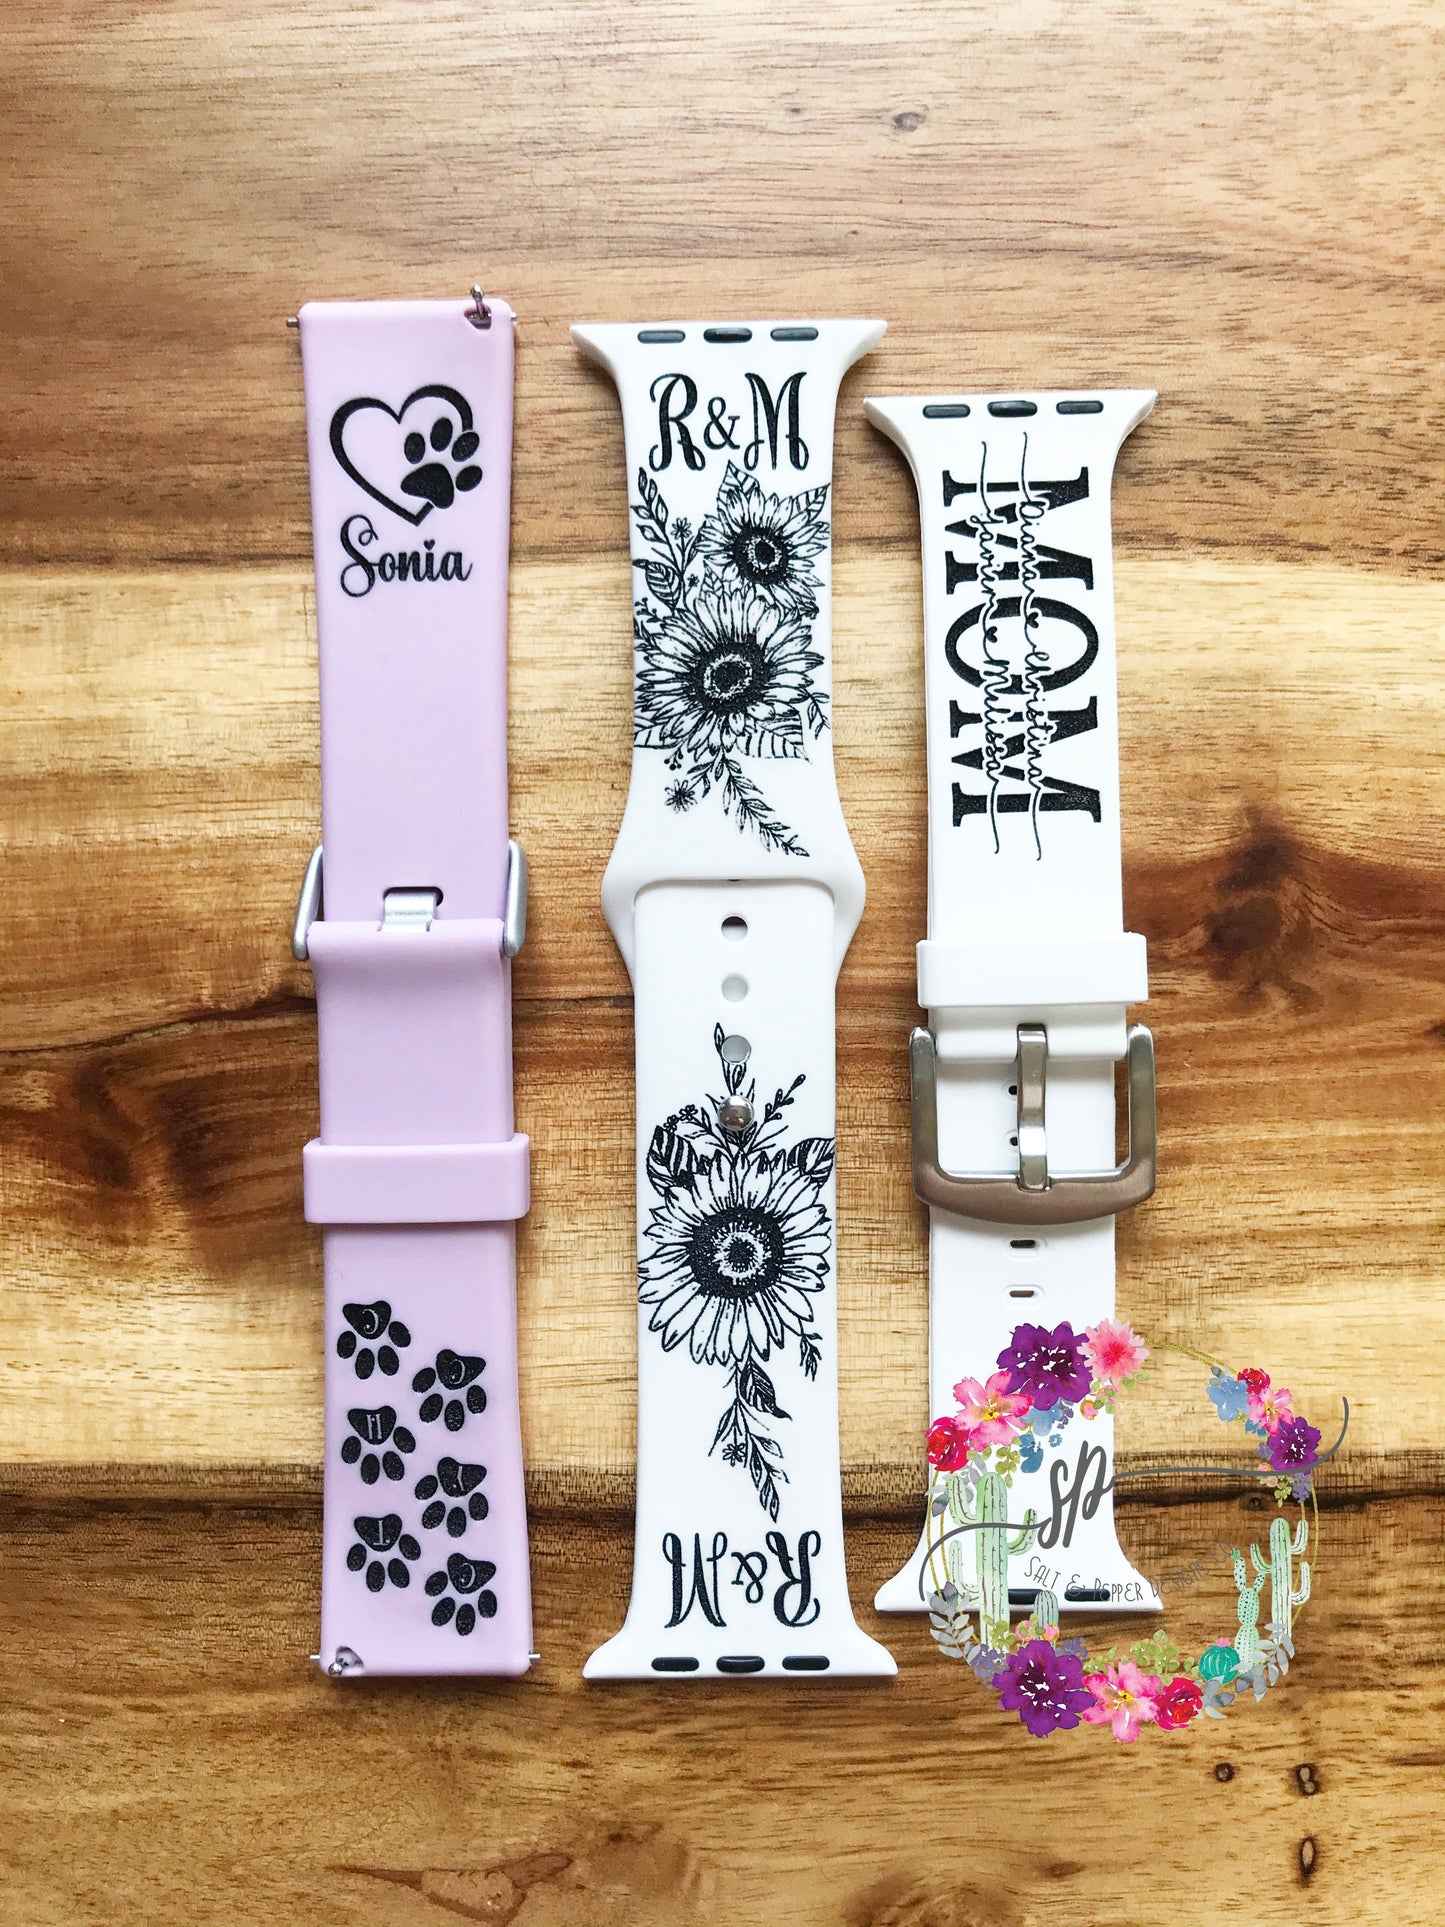 Apple - Watch Bands 42mm/44mm/45mm/49mm S/M/L Band